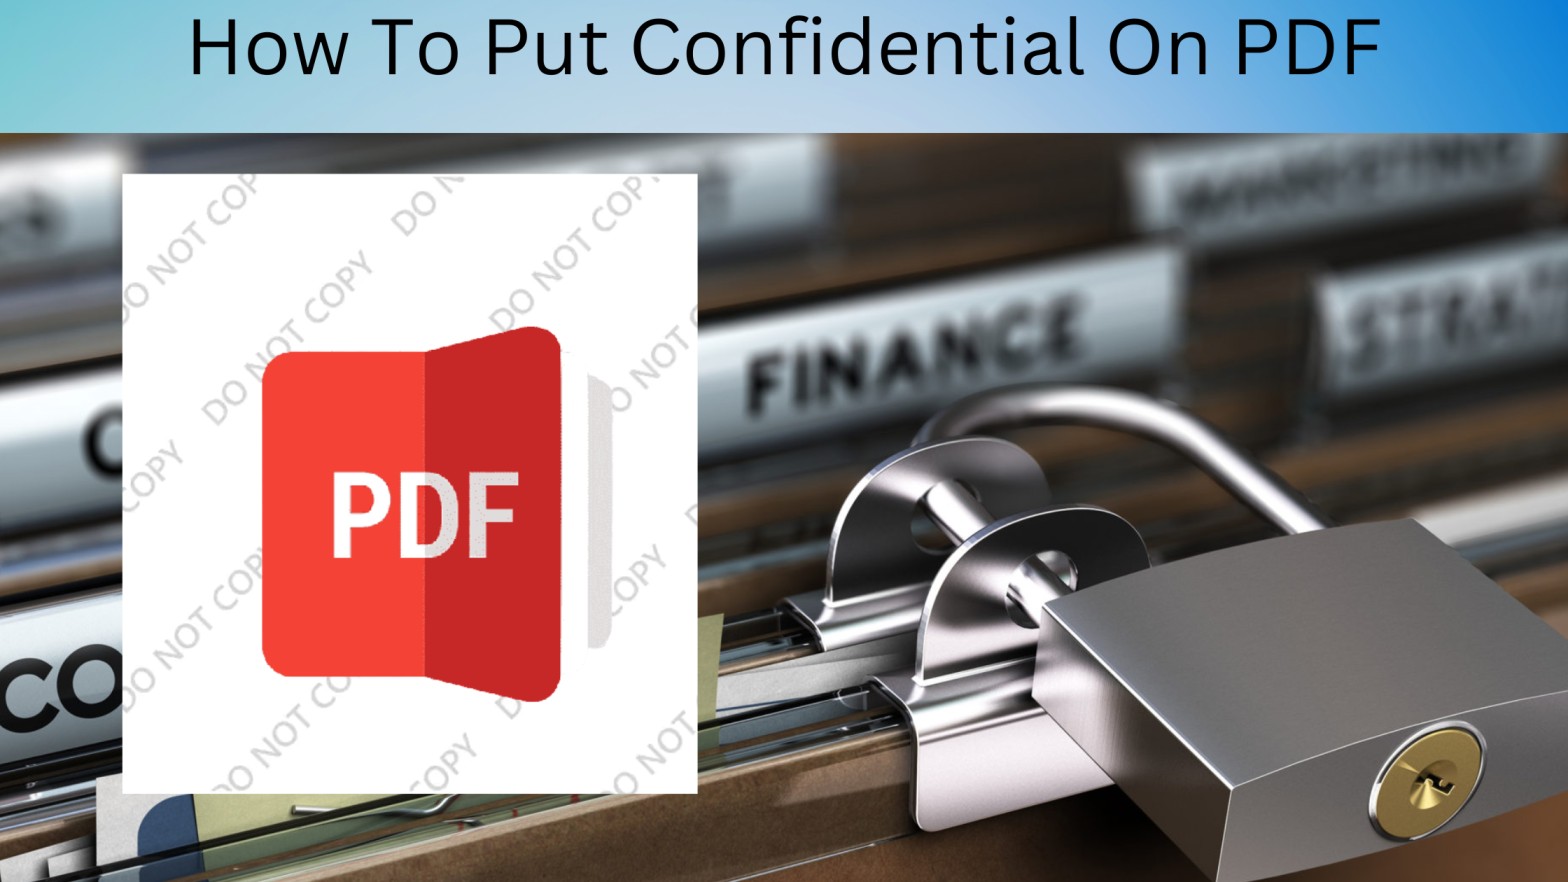 How To Put Confidential On PDF